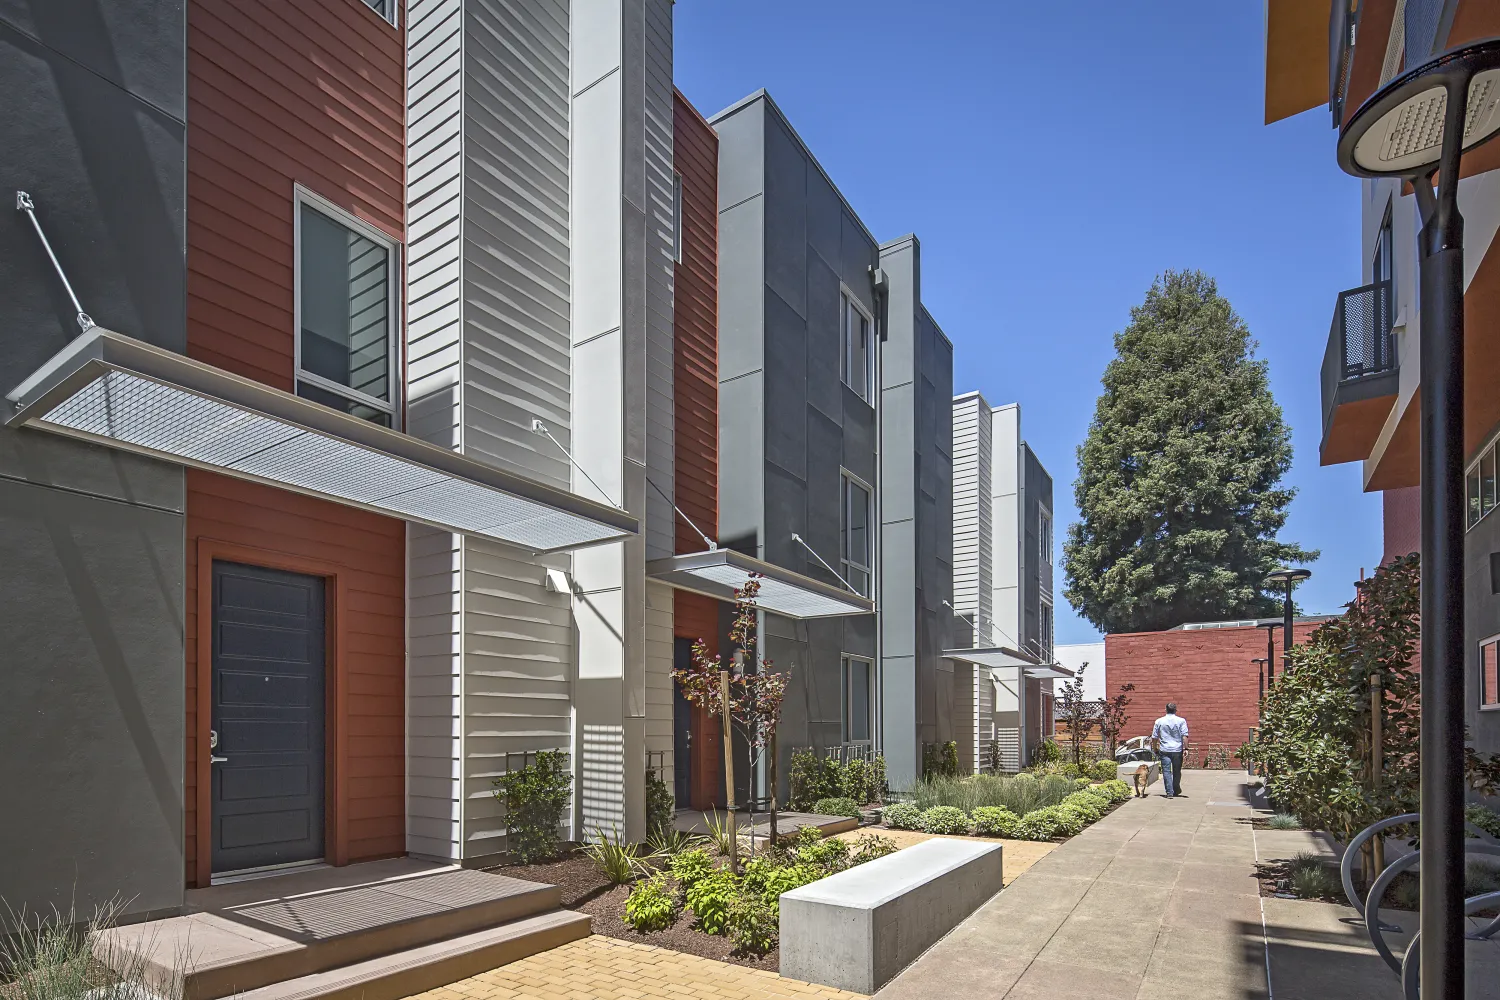 Ground floor units and garden mews at Parker Place in Berkeley, California.